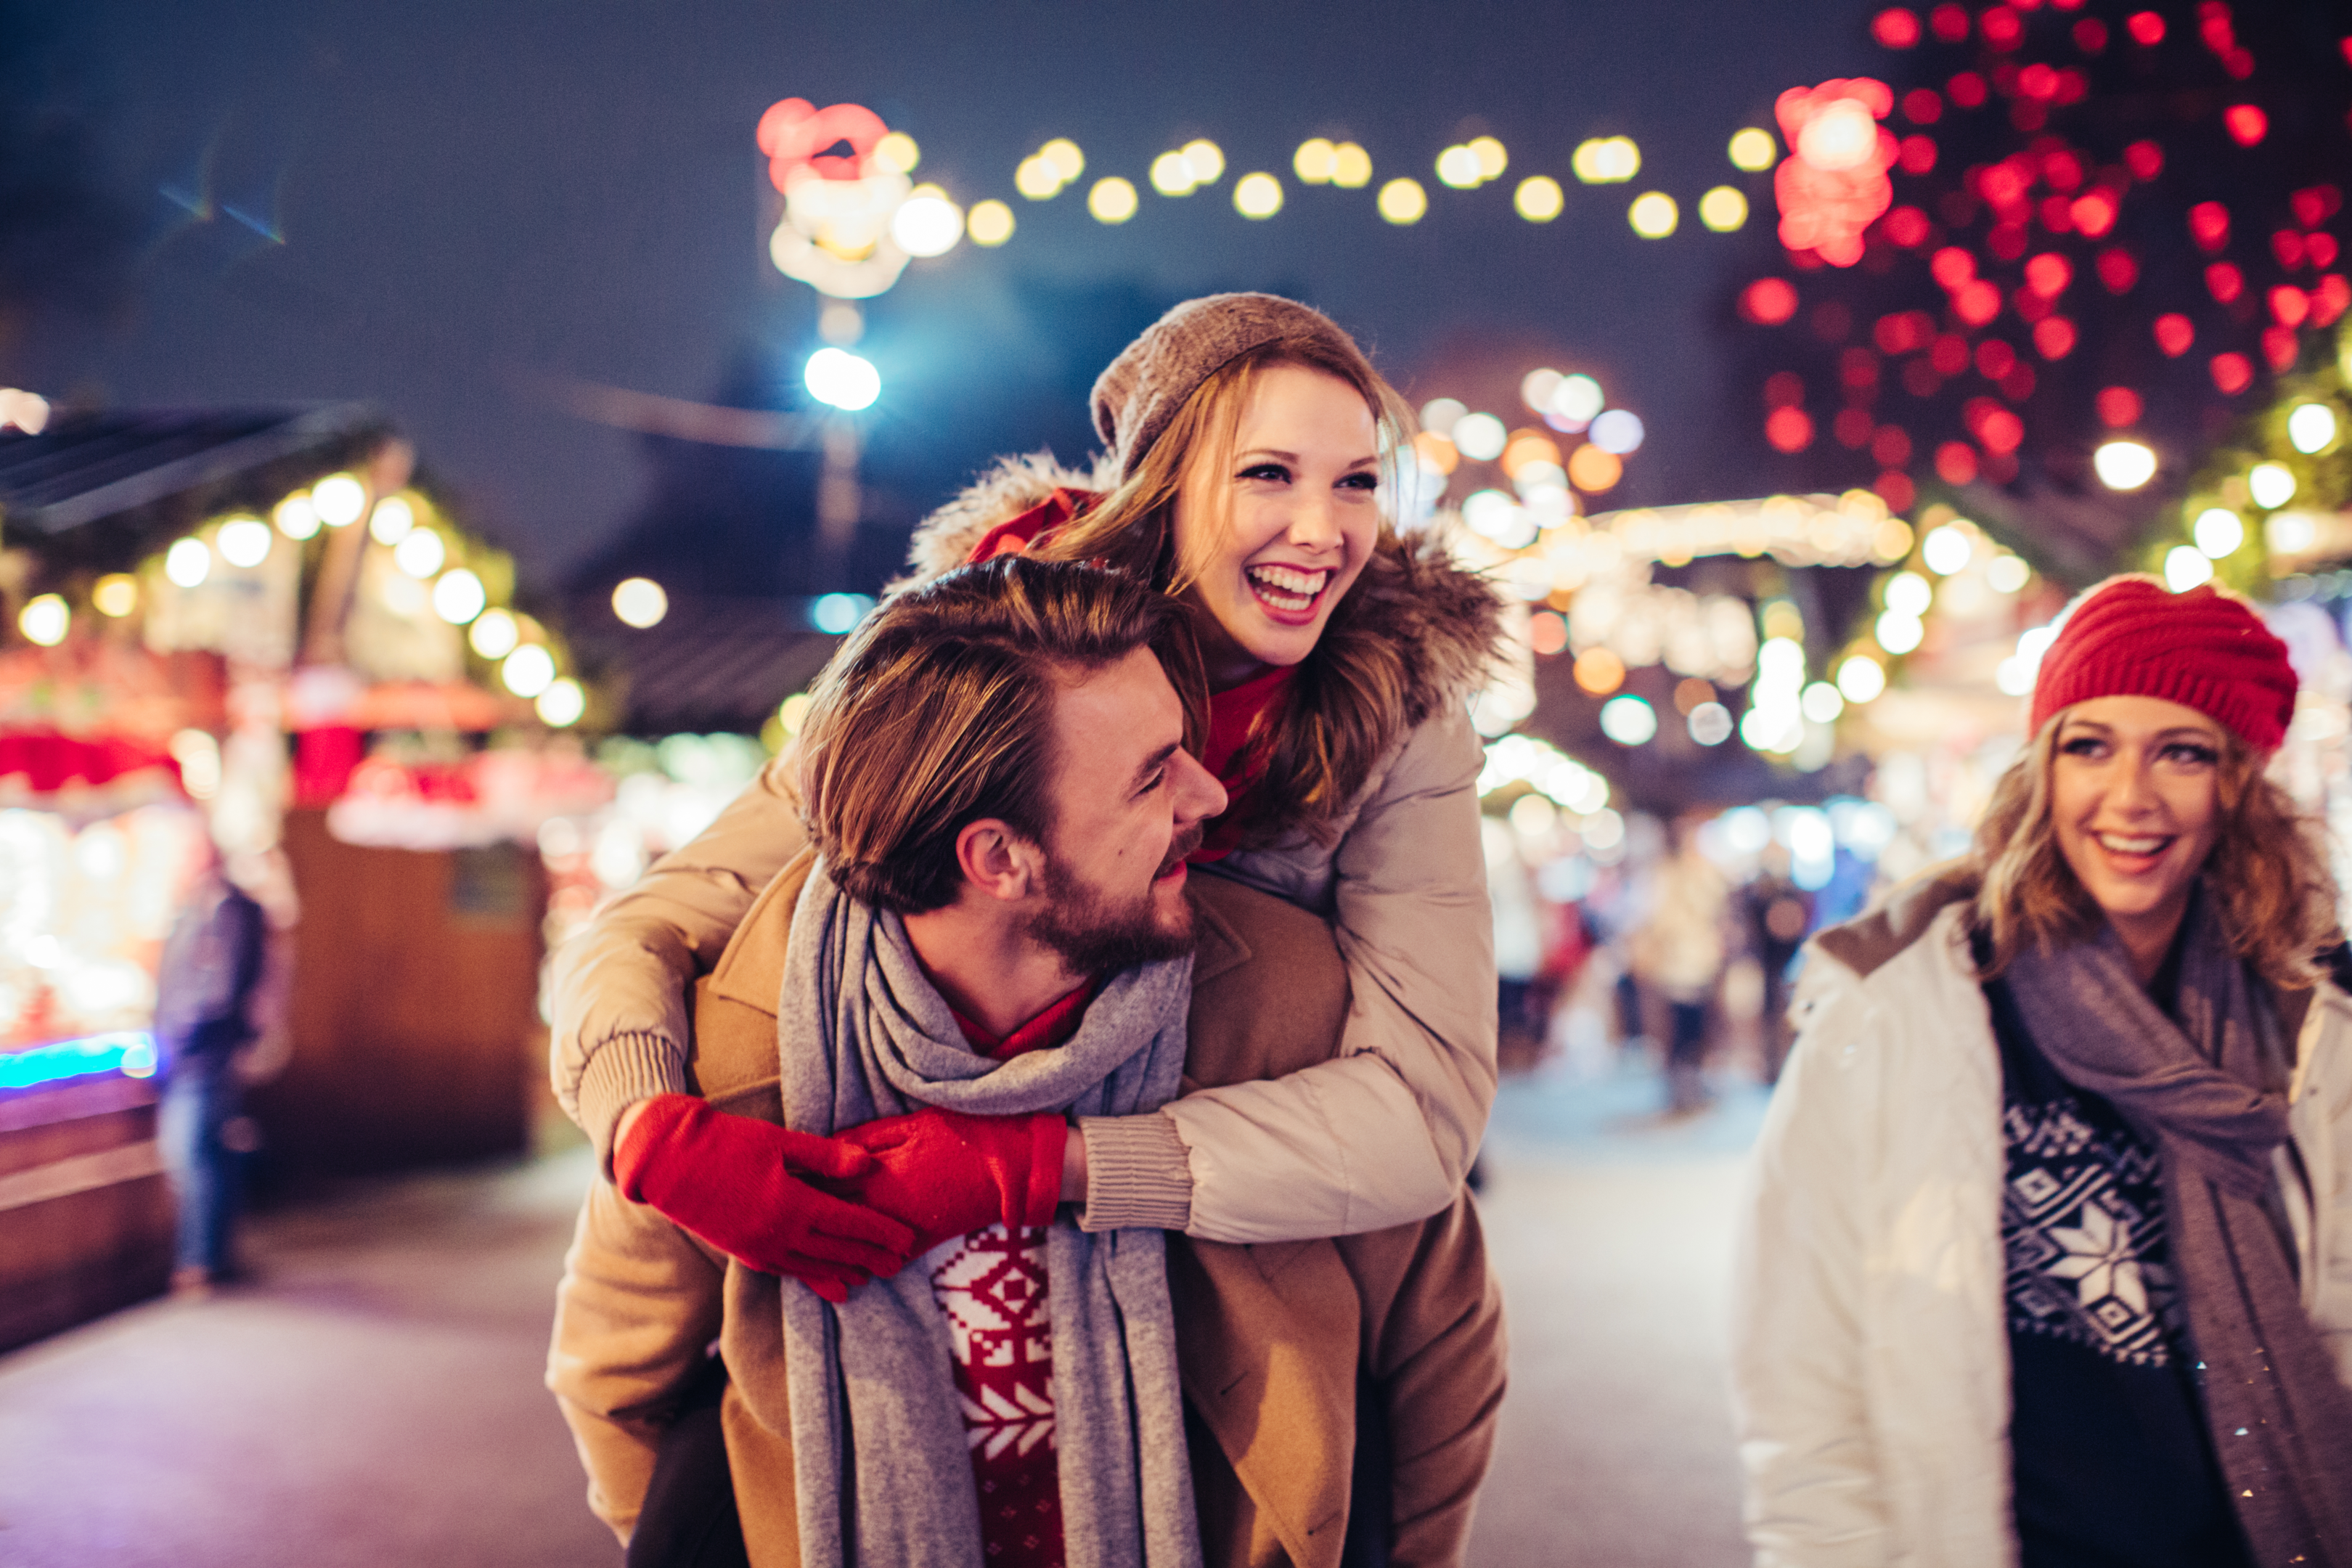 Young couple having fun outdoors in the winter under holiday lights